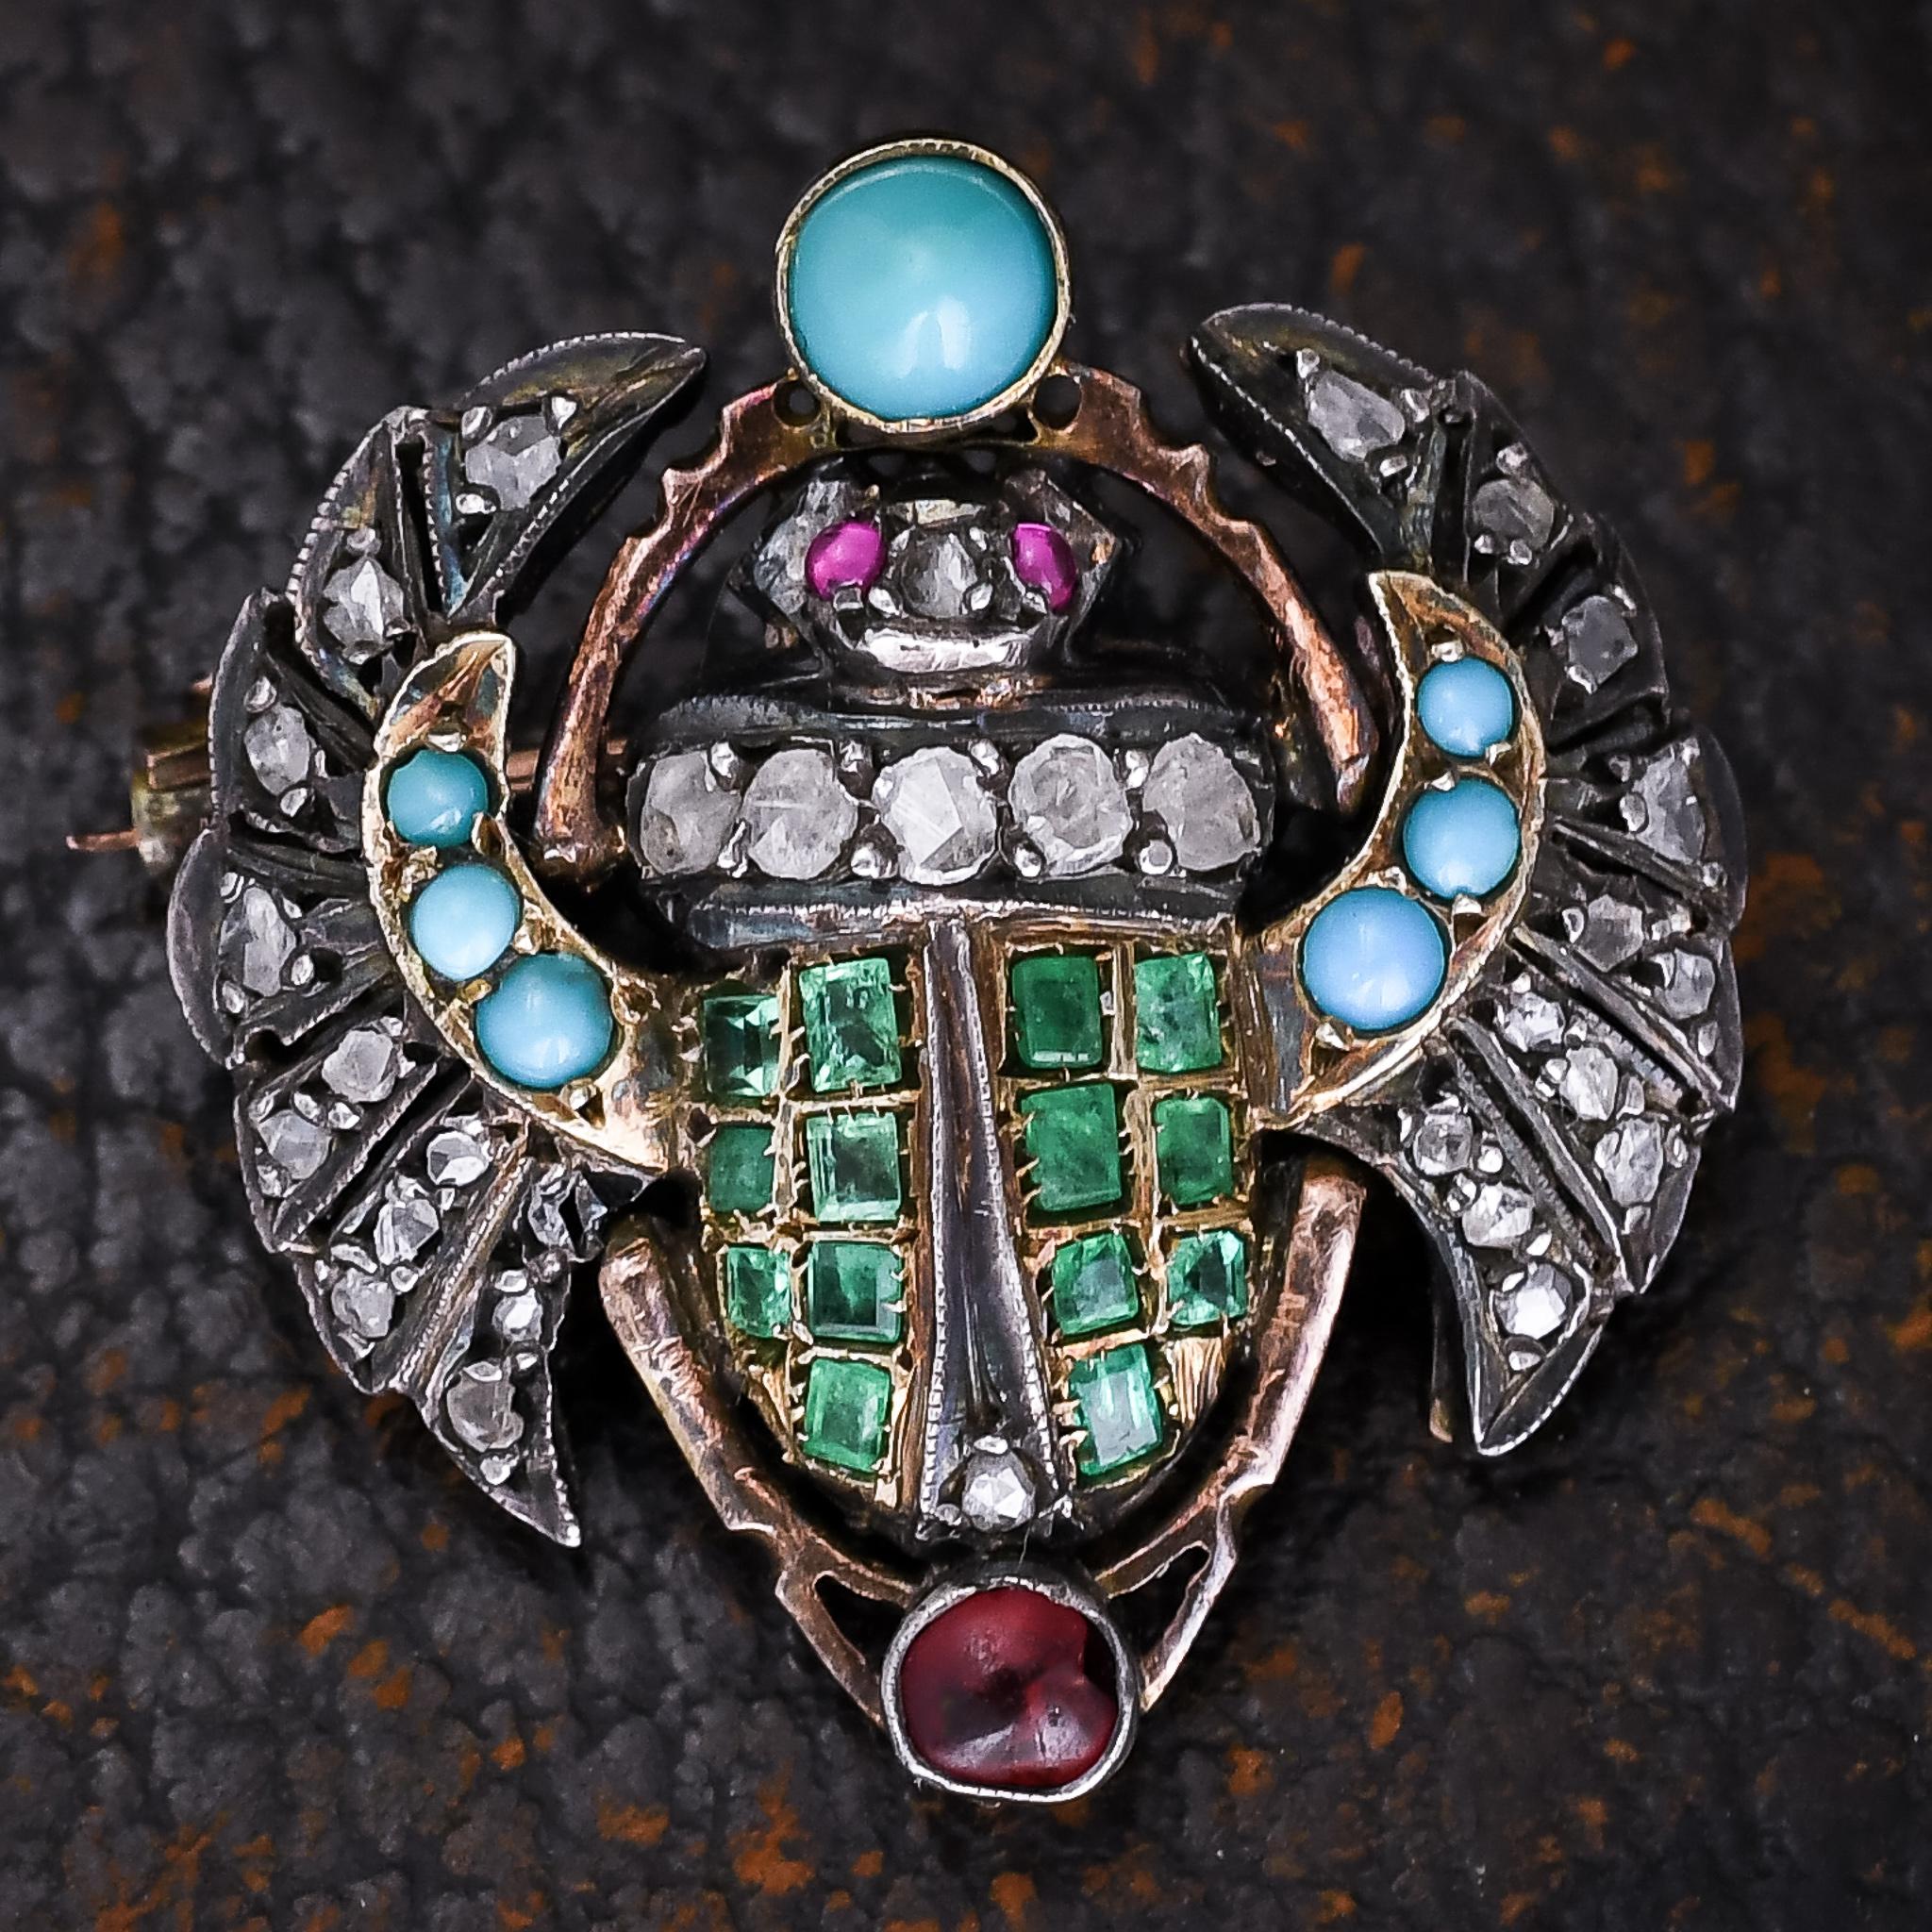 Women's or Men's Antique Victorian Egyptian Revival Winged Scarab Brooch